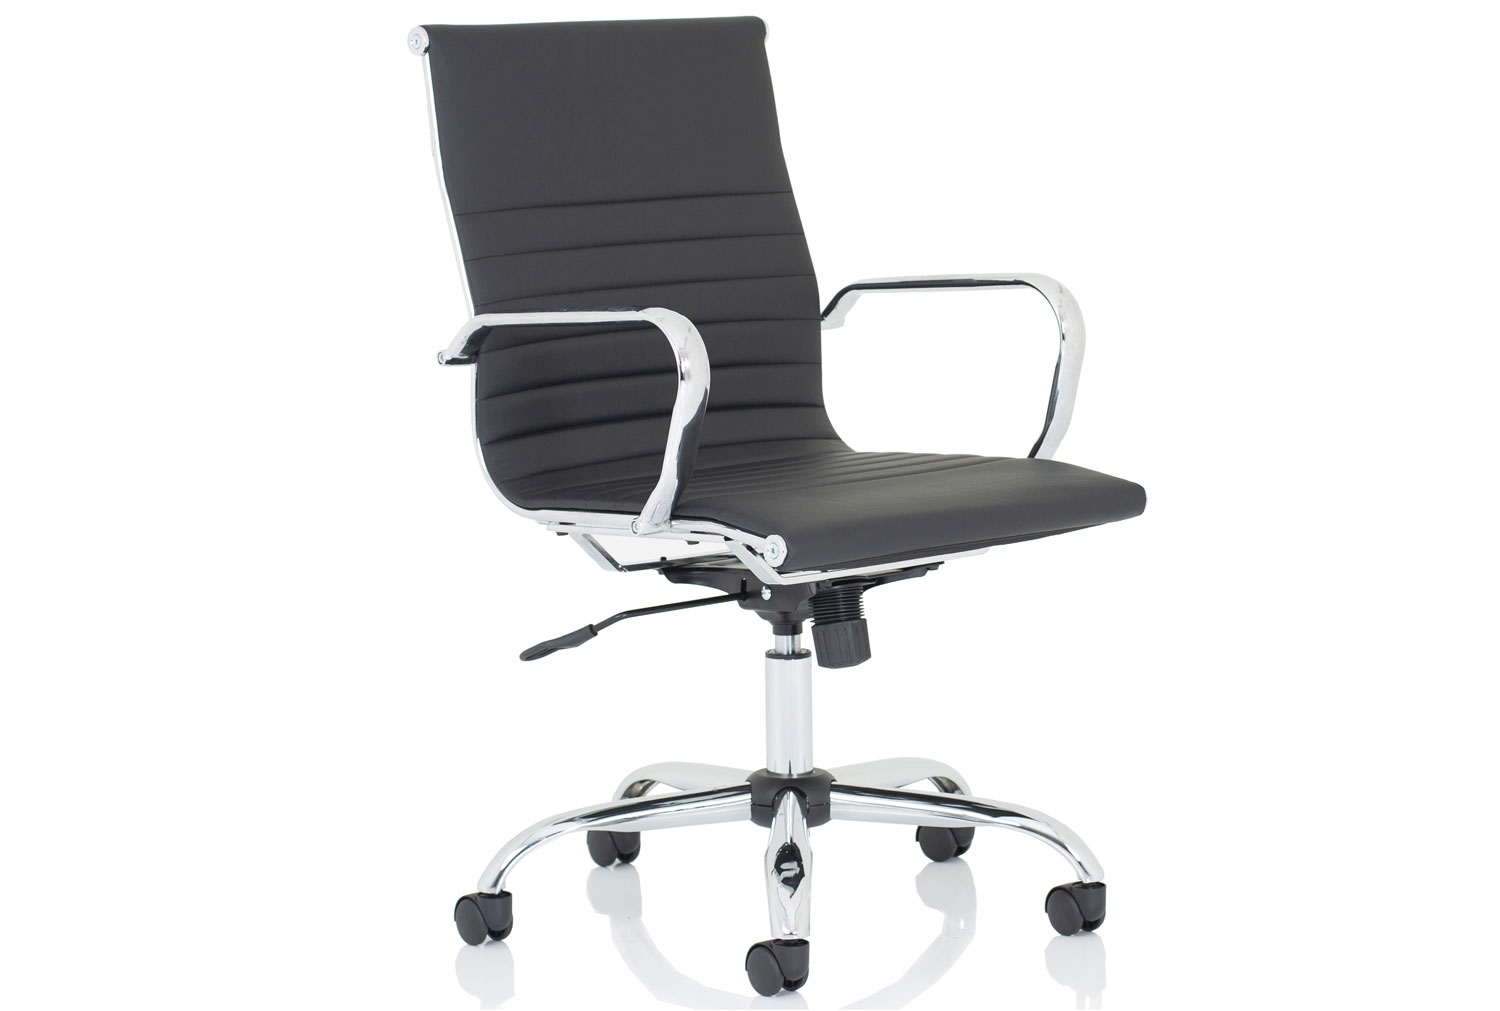 Besos Medium Back Bonded Leather Executive Office Chair (Black), Express Delivery